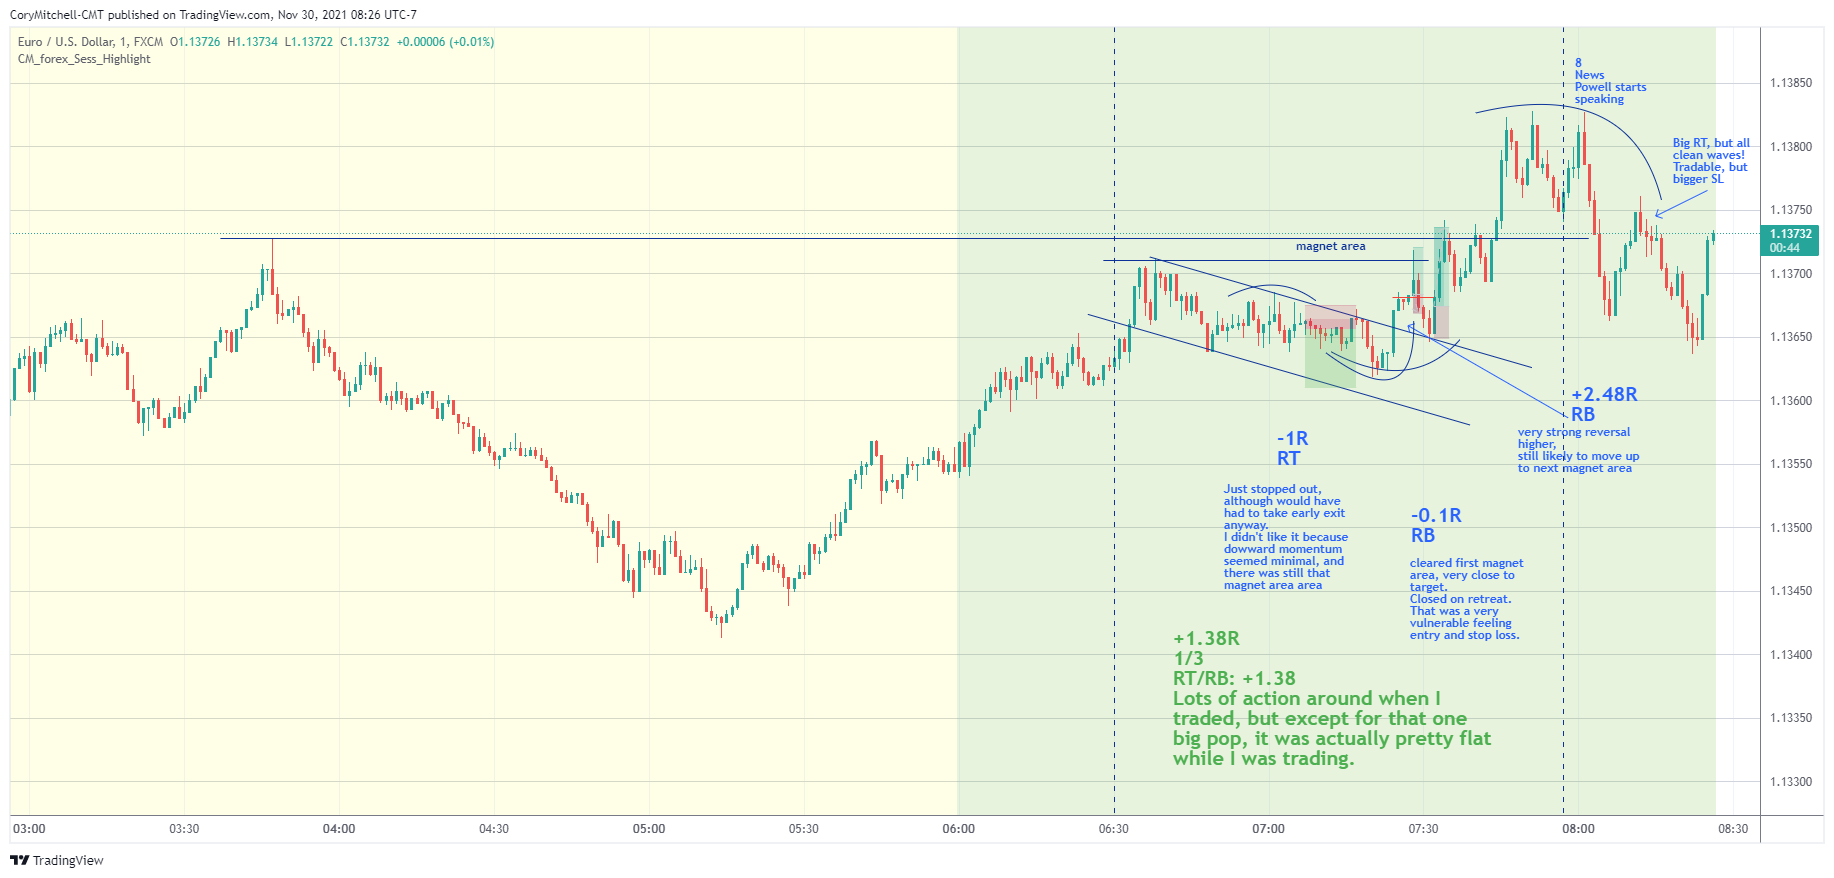 EURUSD day trading examples on 1-minute chart Nov. 30